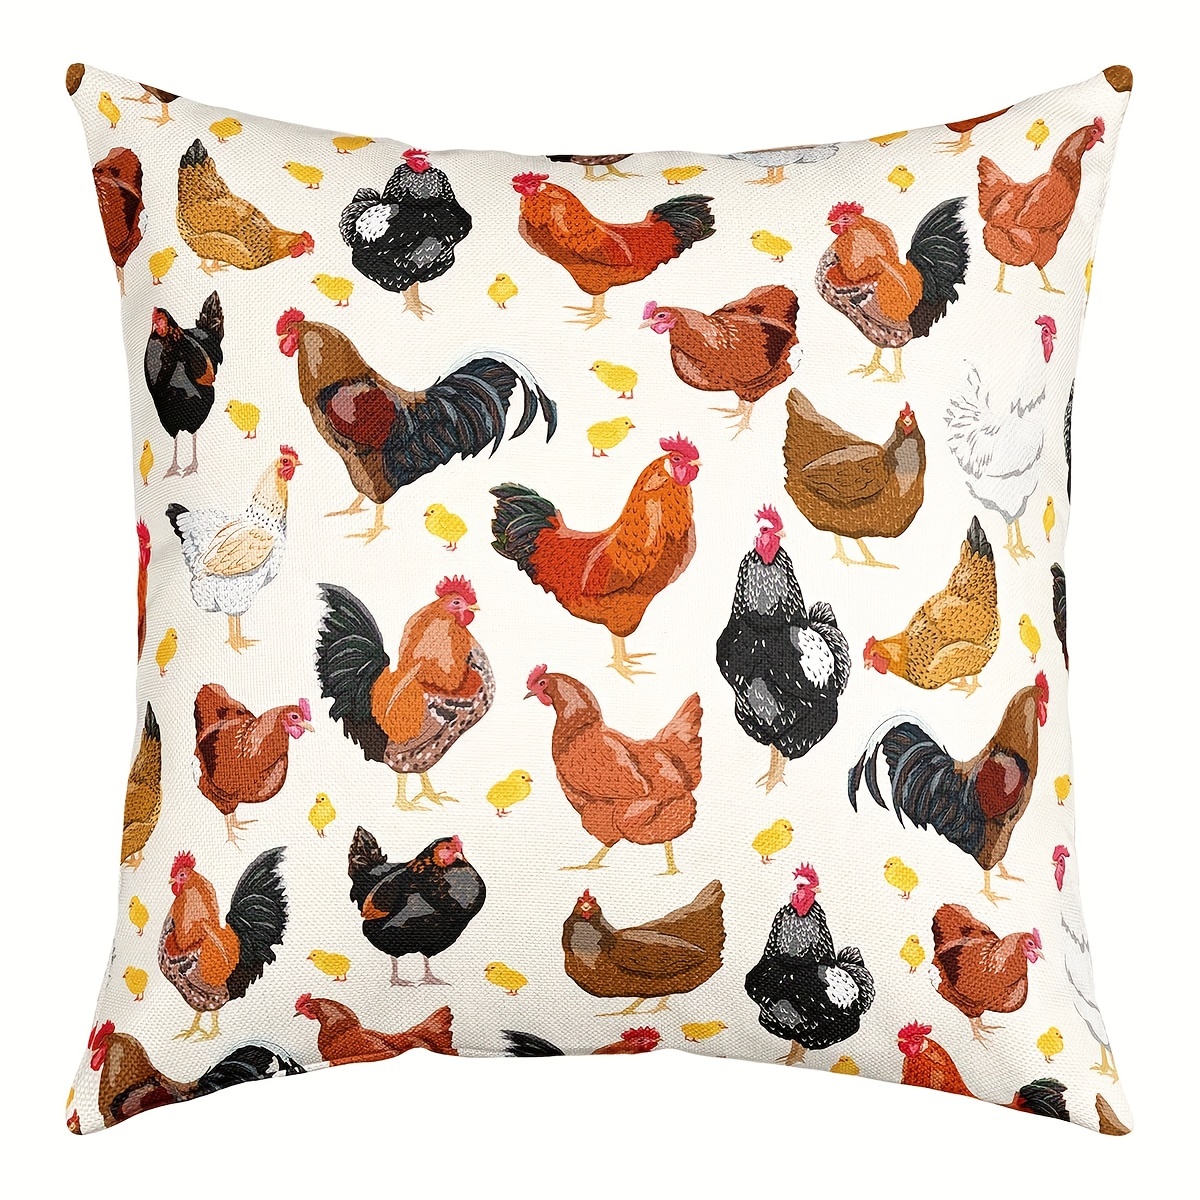 

1pc 18x18in Cartoon Chicken Pillow Cover, Cute Colorful Chick Farm Animal Pillow Case, Farmhouse Style Cushion Cover For Living Room Sofa Car